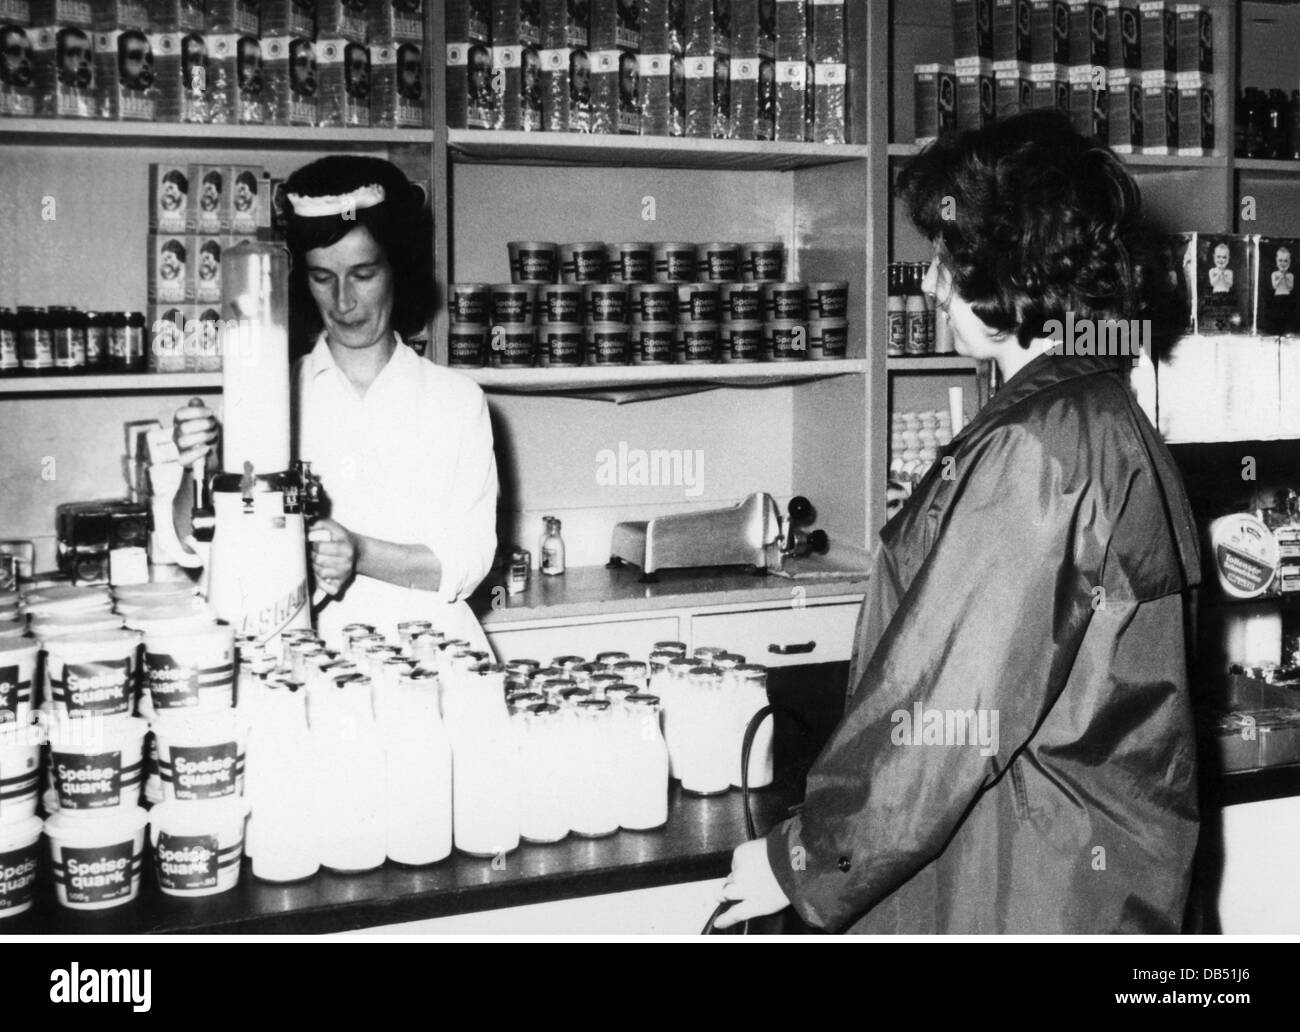 trade, food, milk, hygienic selling of milk at the East German Handelsorganisation (Trade Organisation), Berlin, 1960s, 20th century, geography / travel, Eastern Germany, milk shop, dairy product, dairy products, cascade, cascades, saleswoman, saleswomen, salesladies, customer, customers, shelf, shelves, curd, curd cheese, regular quark, retail trade, retailing, retail and wholesale, retail, food, foodstuff, East-Germany, East Germany, GDR, DDR, 60s, historic, historical, female, woman, women, people, Additional-Rights-Clearences-Not Available Stock Photo